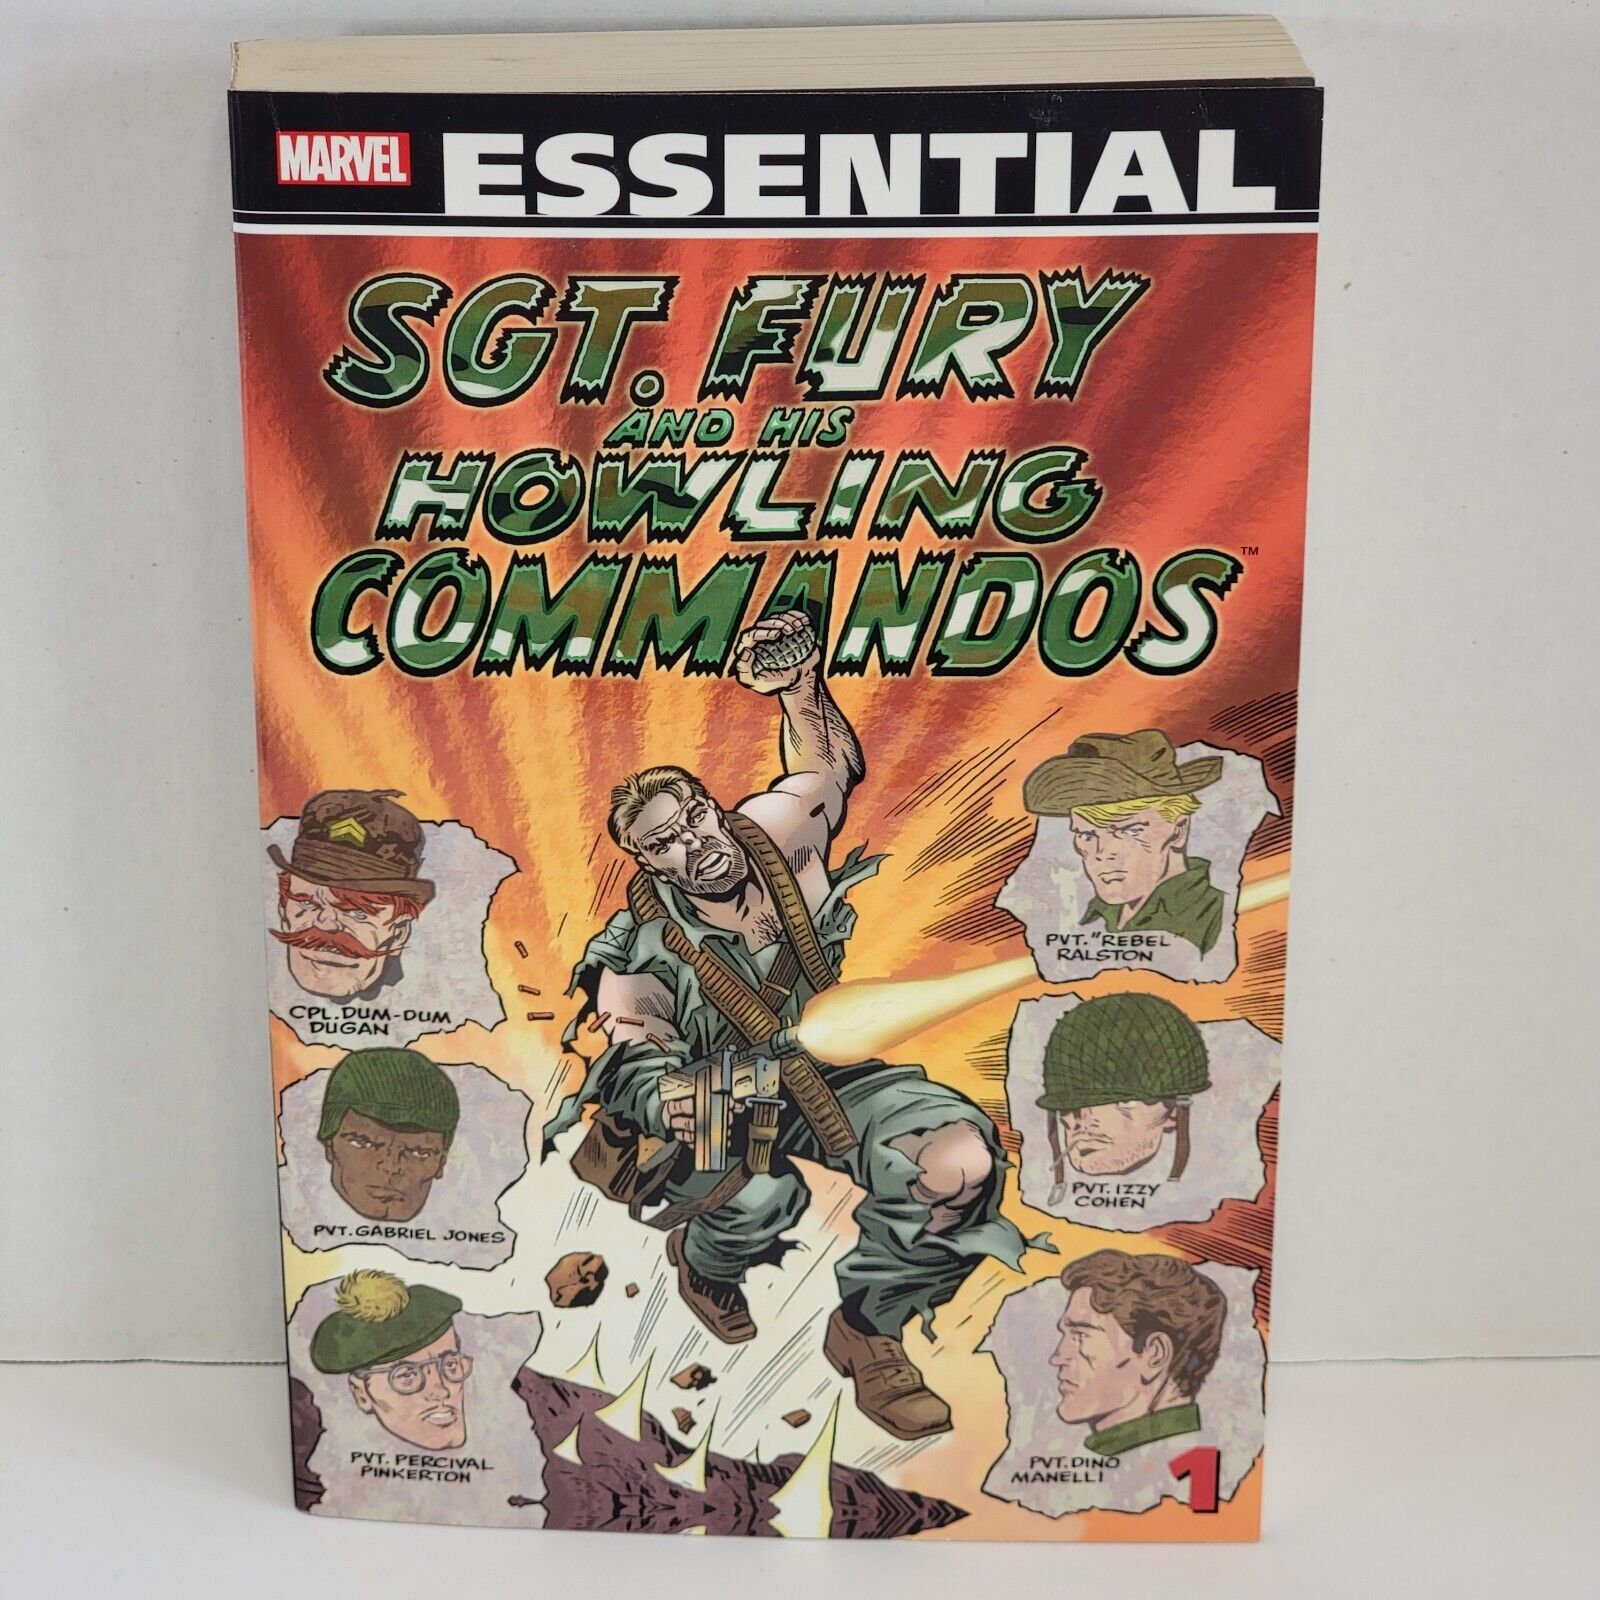 Marvel Essential SGT FURY AND HIS HOWLING COMMANDOS Vol. 1 TPB 2011 